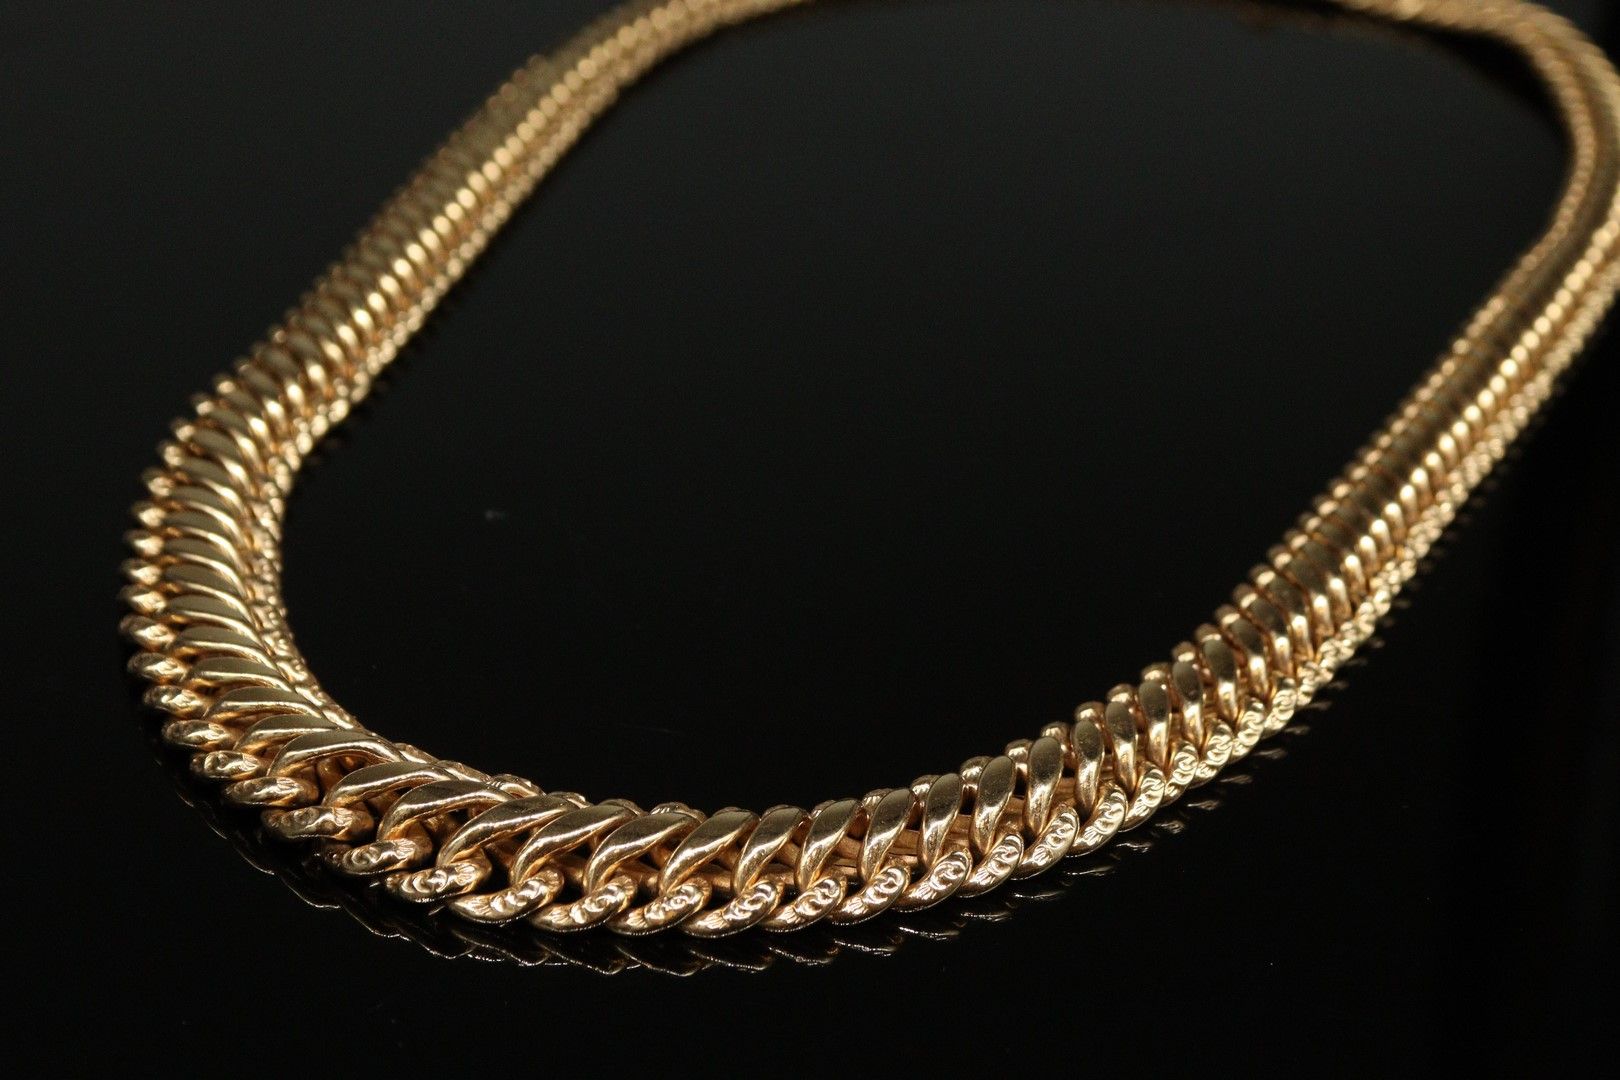 Null Necklace in yellow gold 18k (750).

Necklace : 45 cm - Weight : 32.60 g.